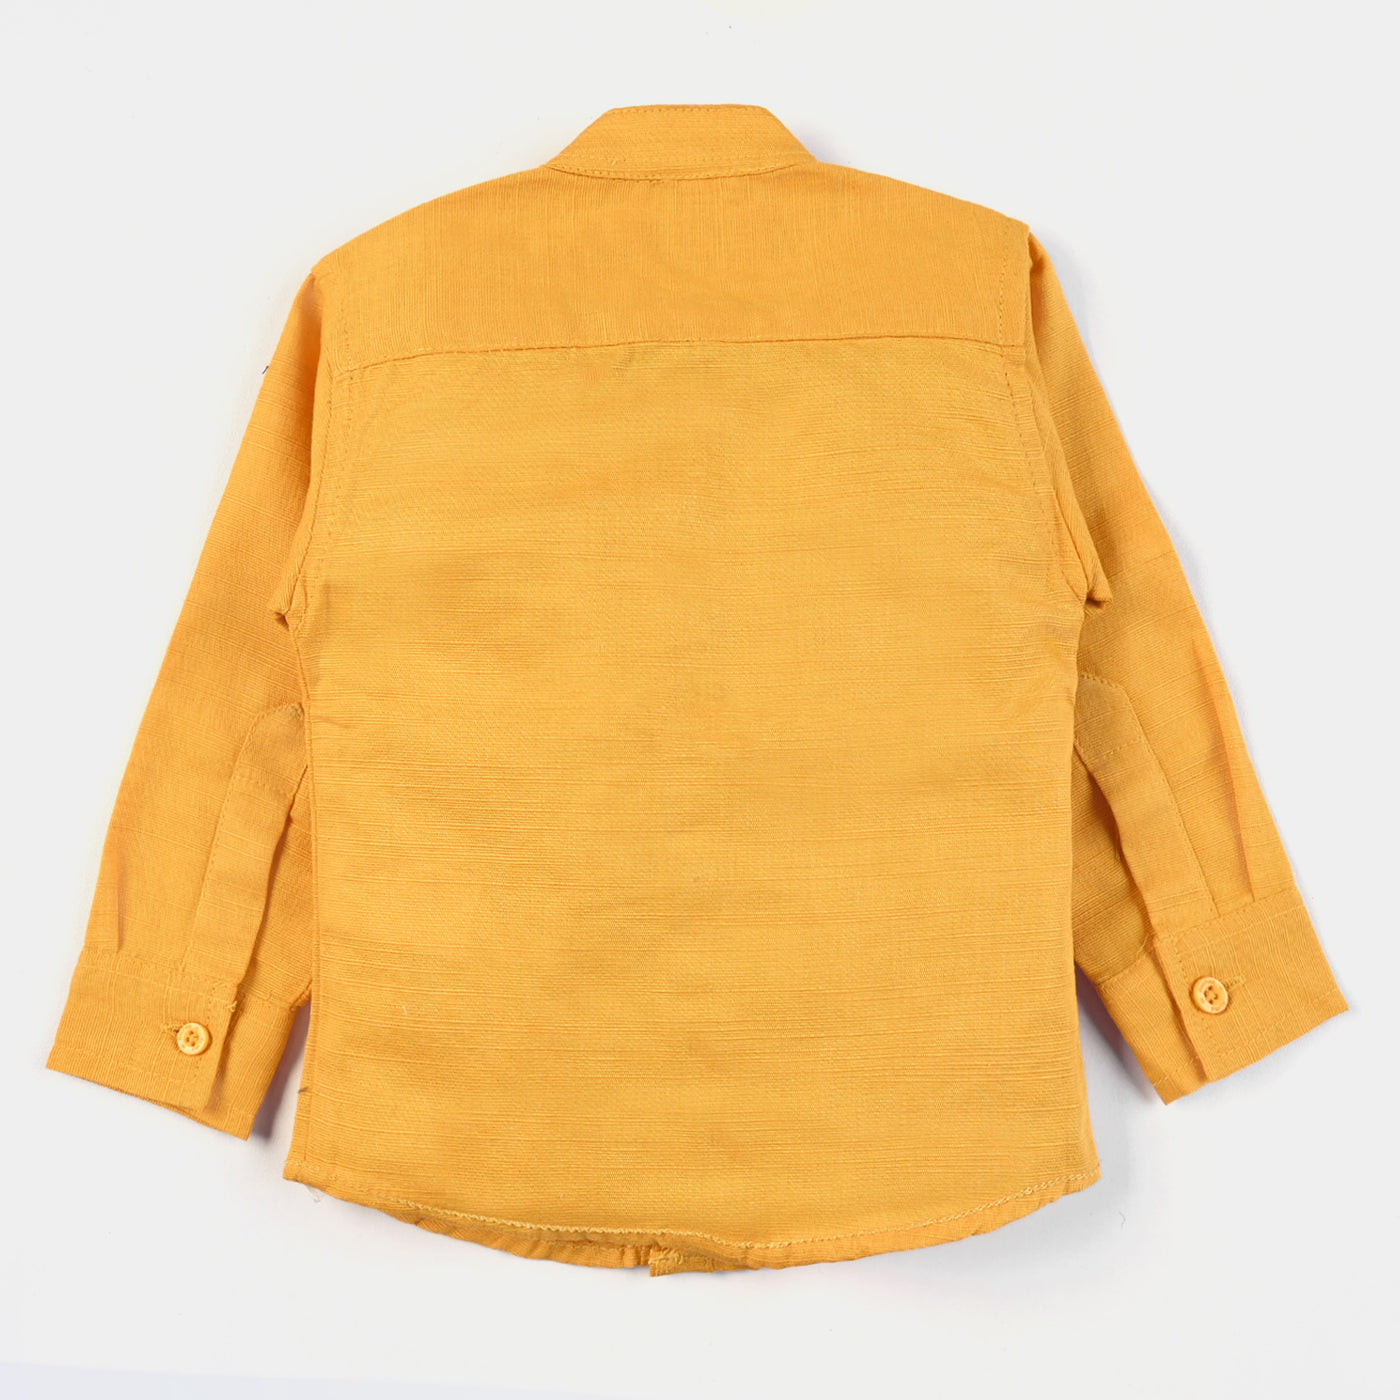 Infant Boys Cotton Casual Shirt Super Star-Yellow